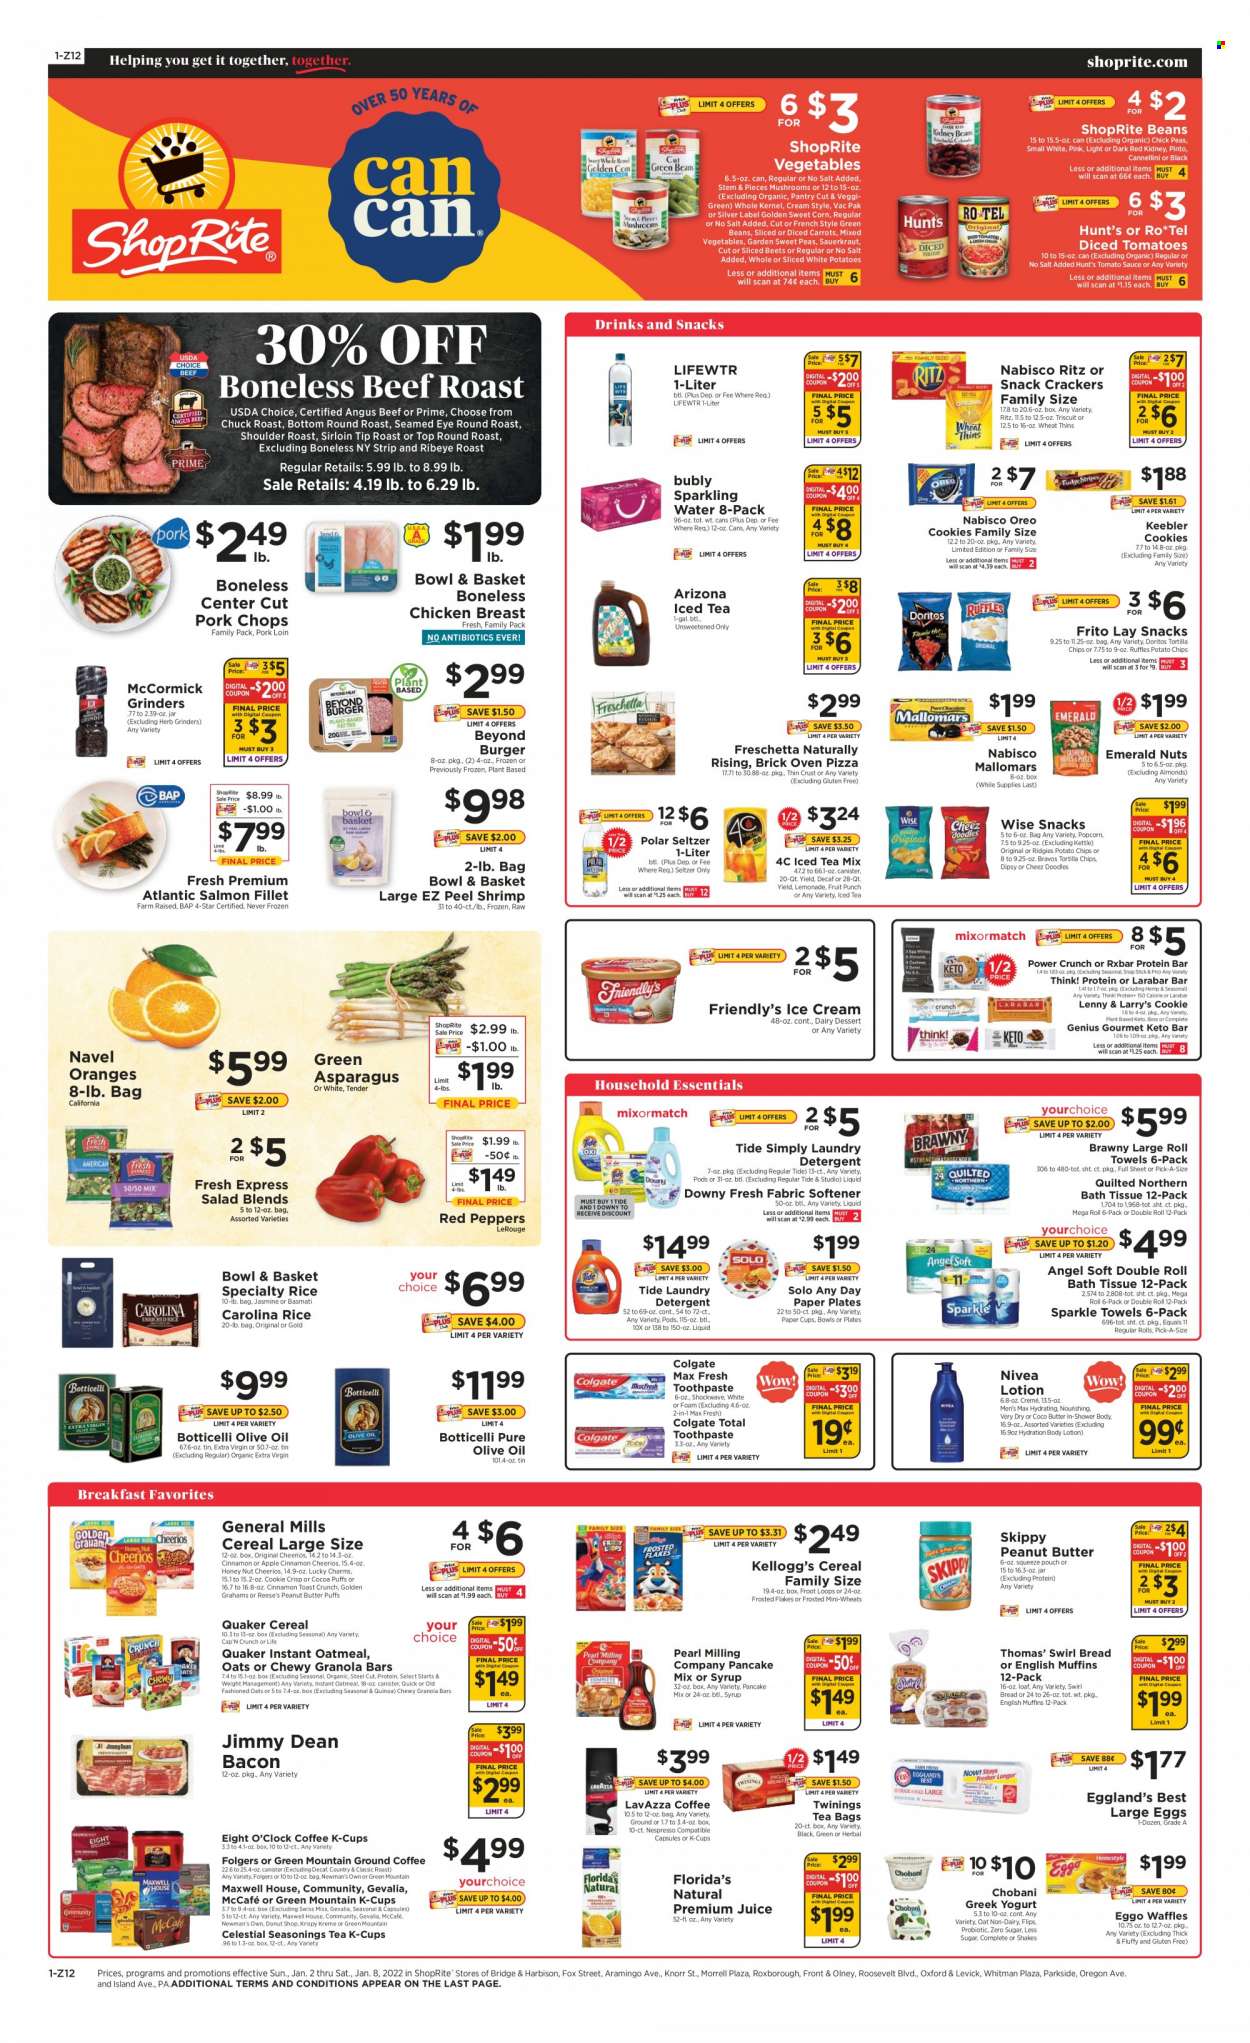 thumbnail - ShopRite Flyer - 01/02/2022 - 01/08/2022 - Sales products - bread, Bowl & Basket, asparagus, corn, green beans, salad, peppers, sweet corn, red peppers, oranges, salmon, salmon fillet, shrimps, pizza, hamburger, Knorr, pancakes, Quaker, Jimmy Dean, bacon, greek yoghurt, Oreo, yoghurt, Chobani, Swiss Miss, shake, large eggs, ice cream, Reese's, Friendly's Ice Cream, mixed vegetables, cookies, crackers, Kellogg's, Florida's Natural, Keebler, RITZ, Doritos, tortilla chips, potato chips, Thins, popcorn, oatmeal, sauerkraut, tomato sauce, cereals, Cheerios, protein bar, granola bar, Cap'n Crunch, Frosted Flakes, basmati rice, quinoa, rice, extra virgin olive oil, olive oil, oil, peanut butter, almonds, lemonade, juice, AriZona, fruit punch, seltzer water, sparkling water, Lifewtr, Maxwell House, tea bags, Twinings, Nespresso, Folgers, coffee capsules, McCafe, K-Cups, Gevalia, Lavazza, Eight O'Clock, Green Mountain, chicken breasts, beef meat, round roast, roast beef, chuck roast, pork chops, pork loin, pork meat, Nivea, bath tissue, Quilted Northern, paper towels, detergent, Tide, fabric softener, laundry detergent, Colgate, toothpaste, body lotion, plate, paper, paper plate, party cups, navel oranges. Page 1.